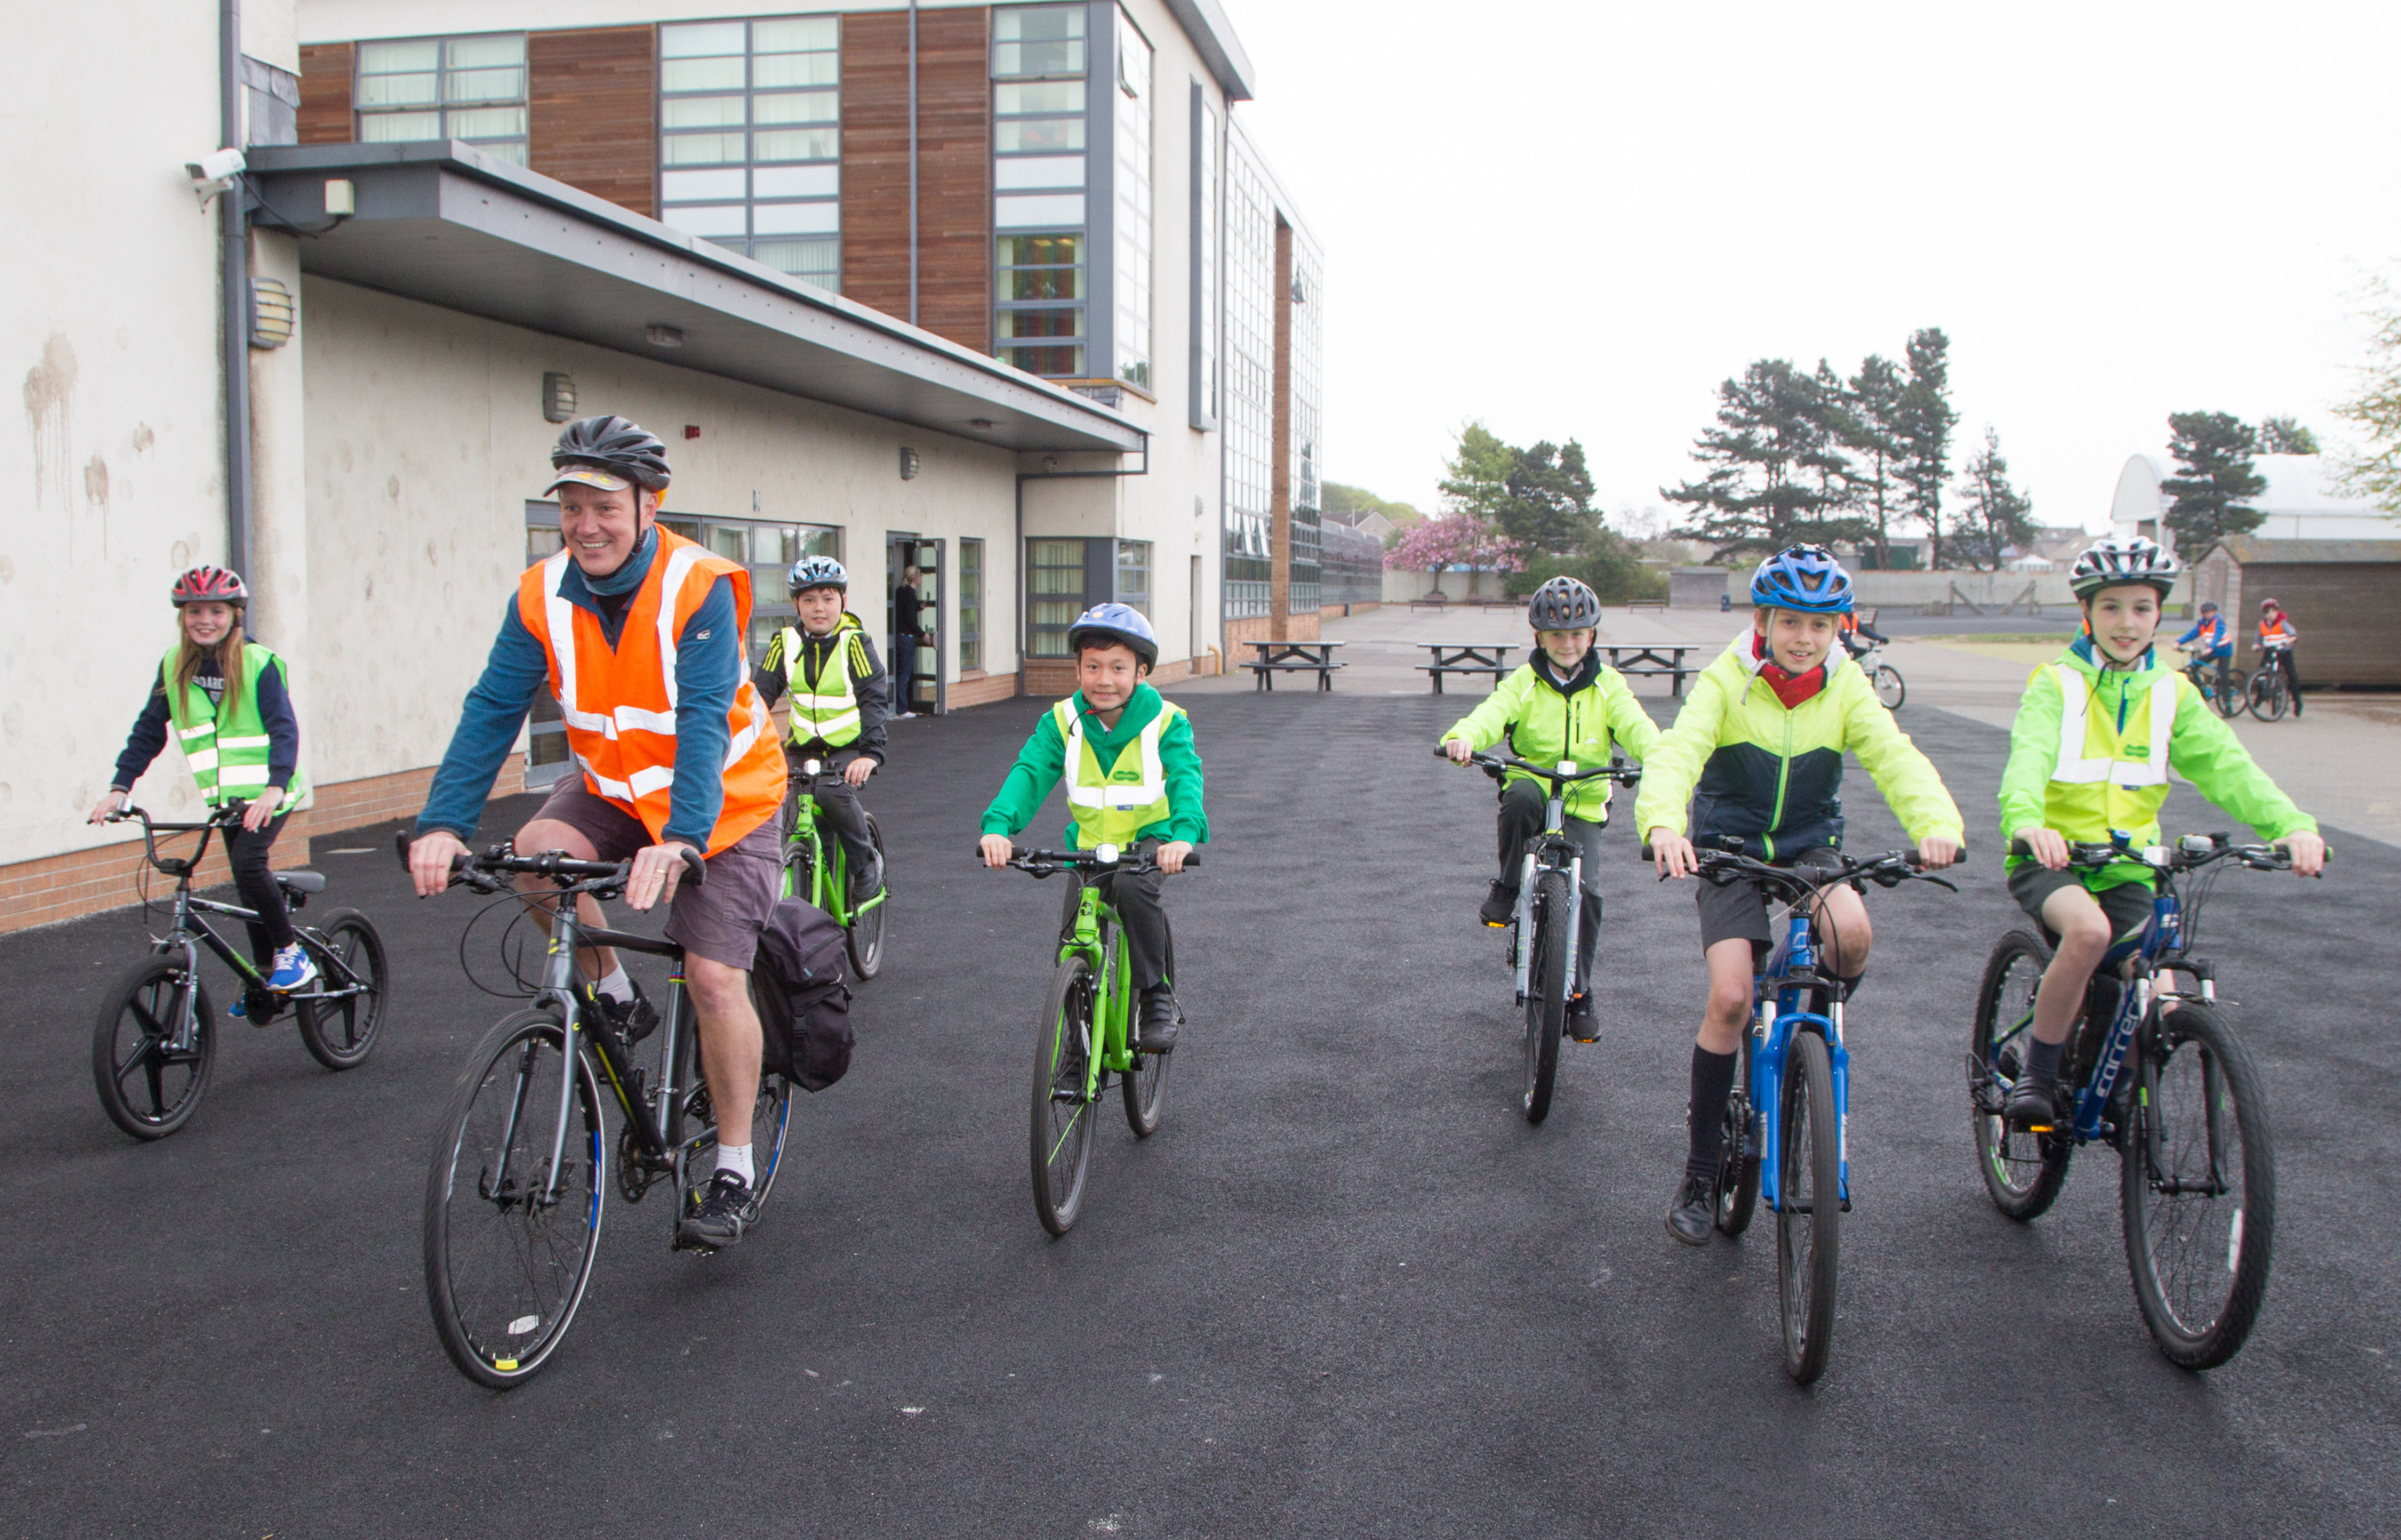 Sustrans Scotland I Bike volunteers work with I Bike schools across the country supporting children to cycle, scoot and walk to school.